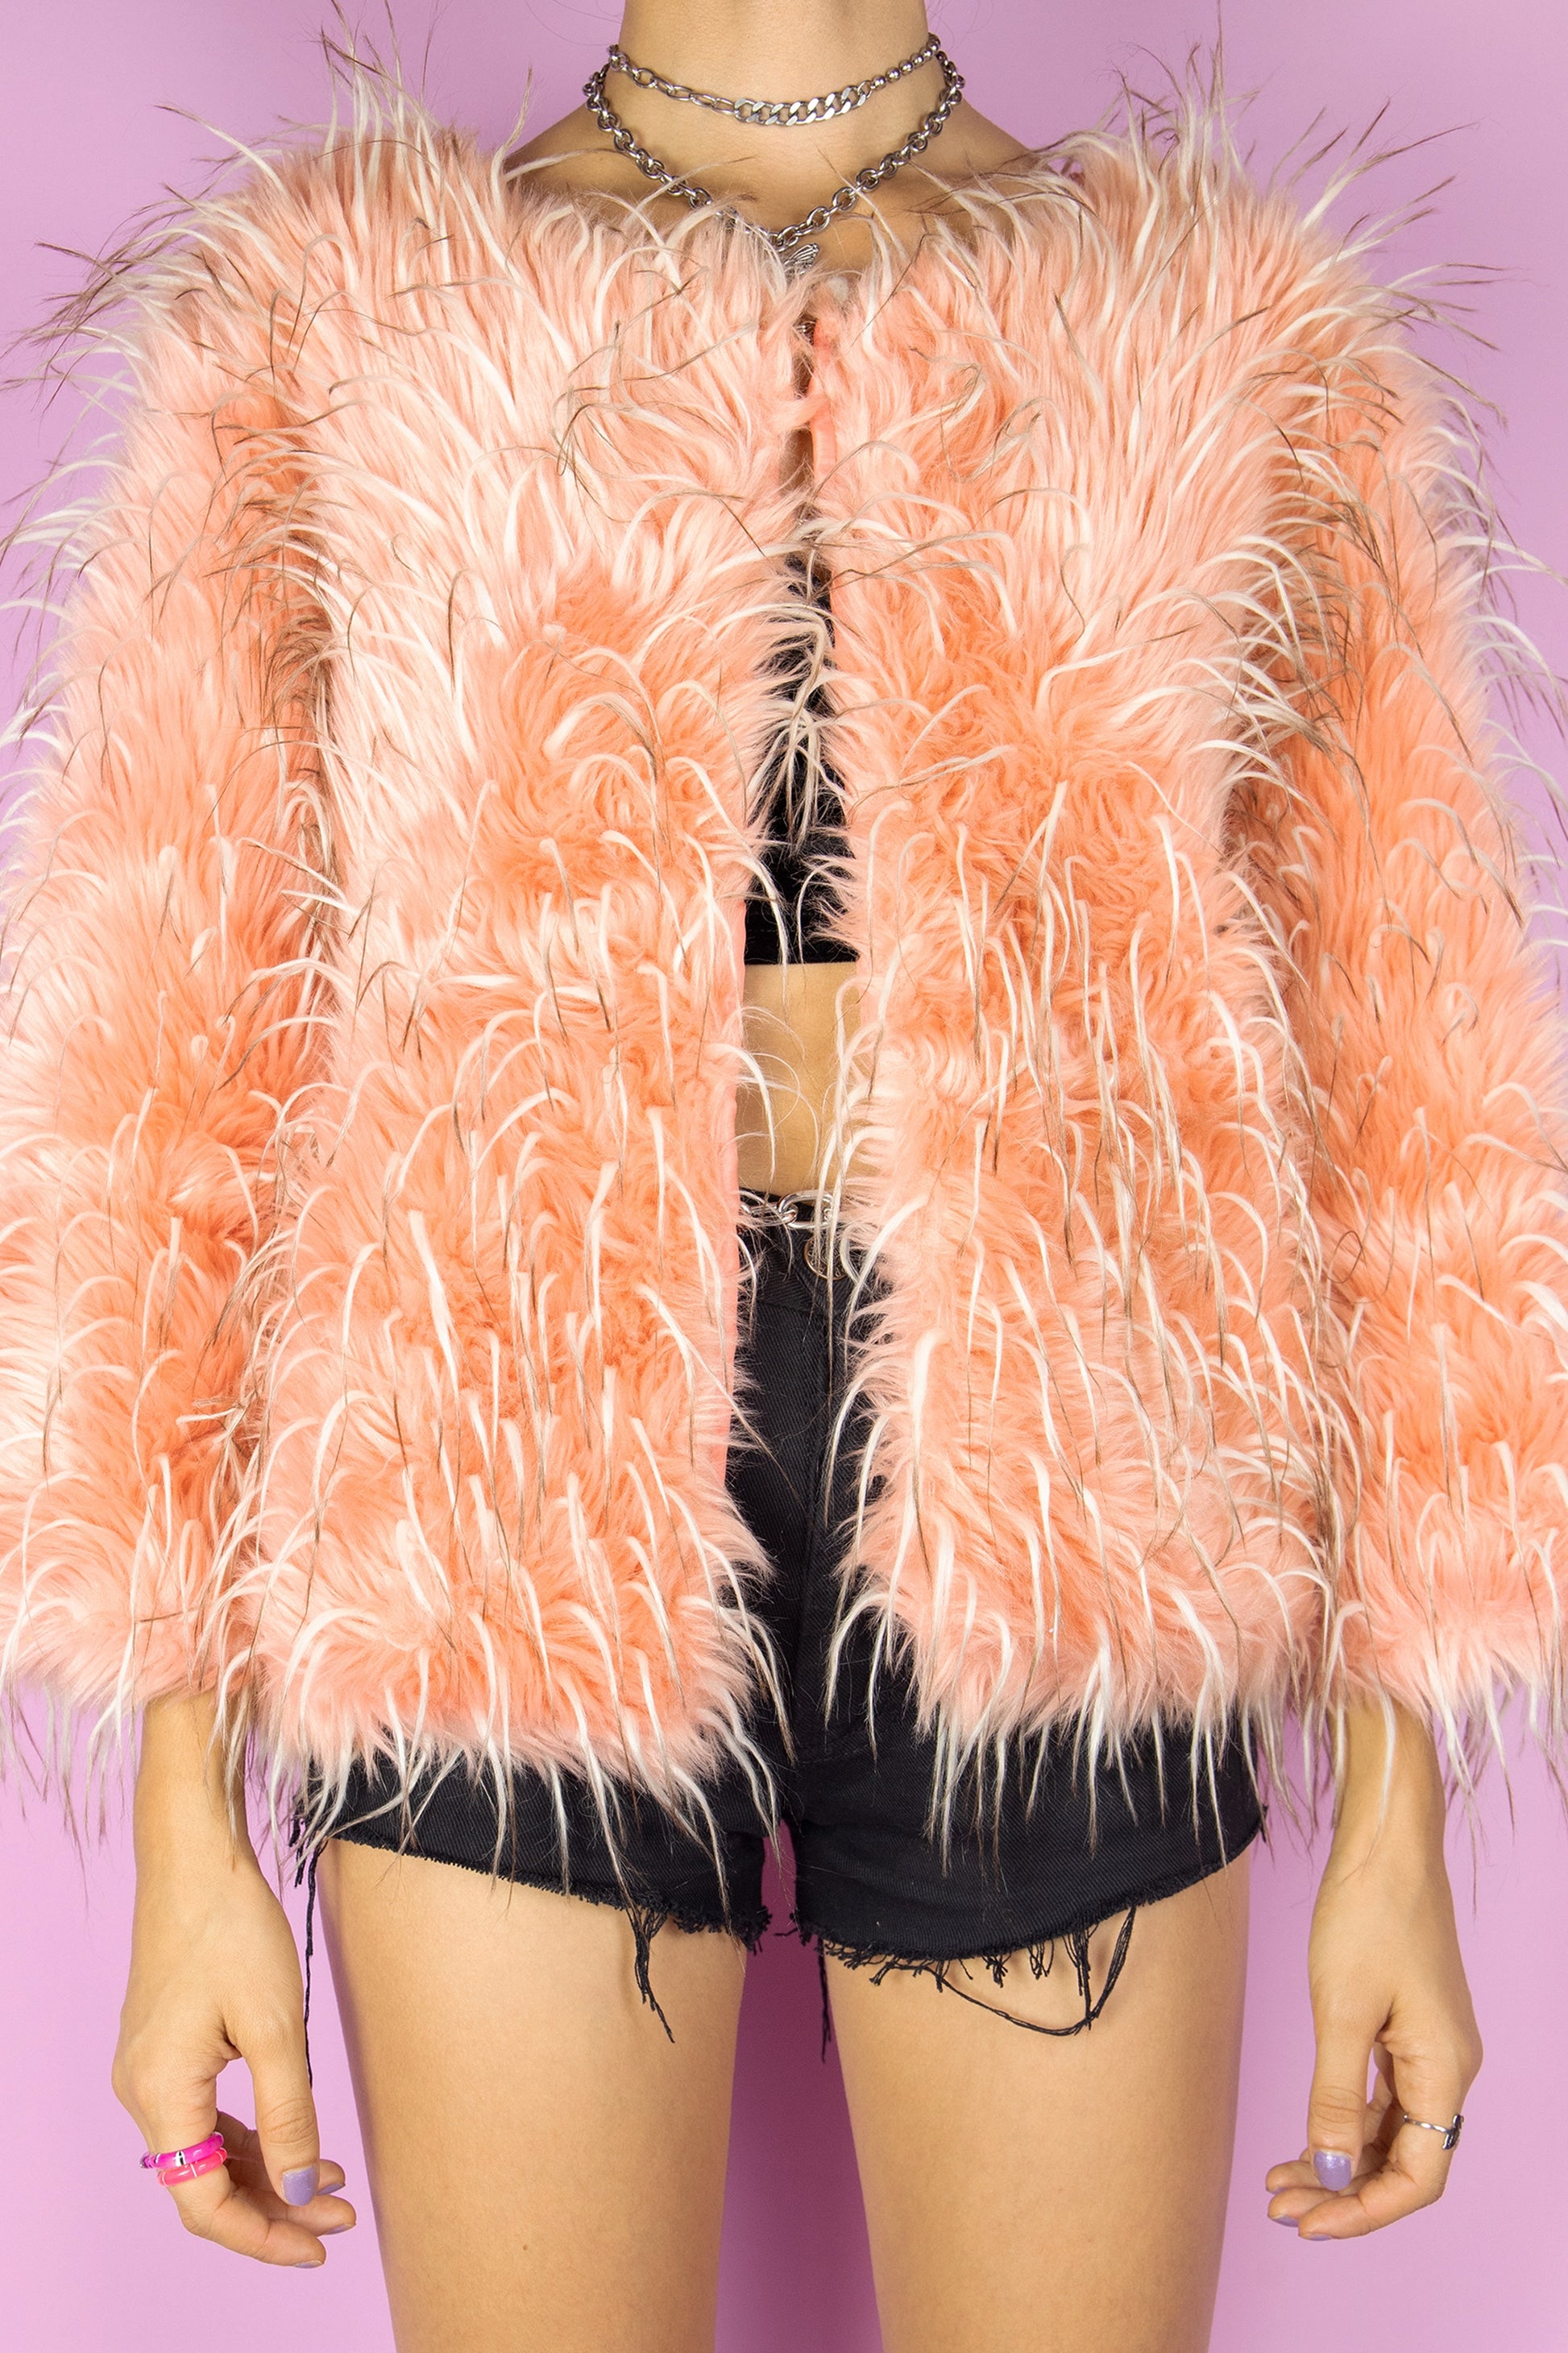 The Vintage 90’s Orange Shaggy Faux Fur Jacket features a salmon peach orange hue in a shaggy faux fur design with a hook closure. Ideal for festivals, raves, and clubbing, this iconic cyber statement coat hails from the 1990s.